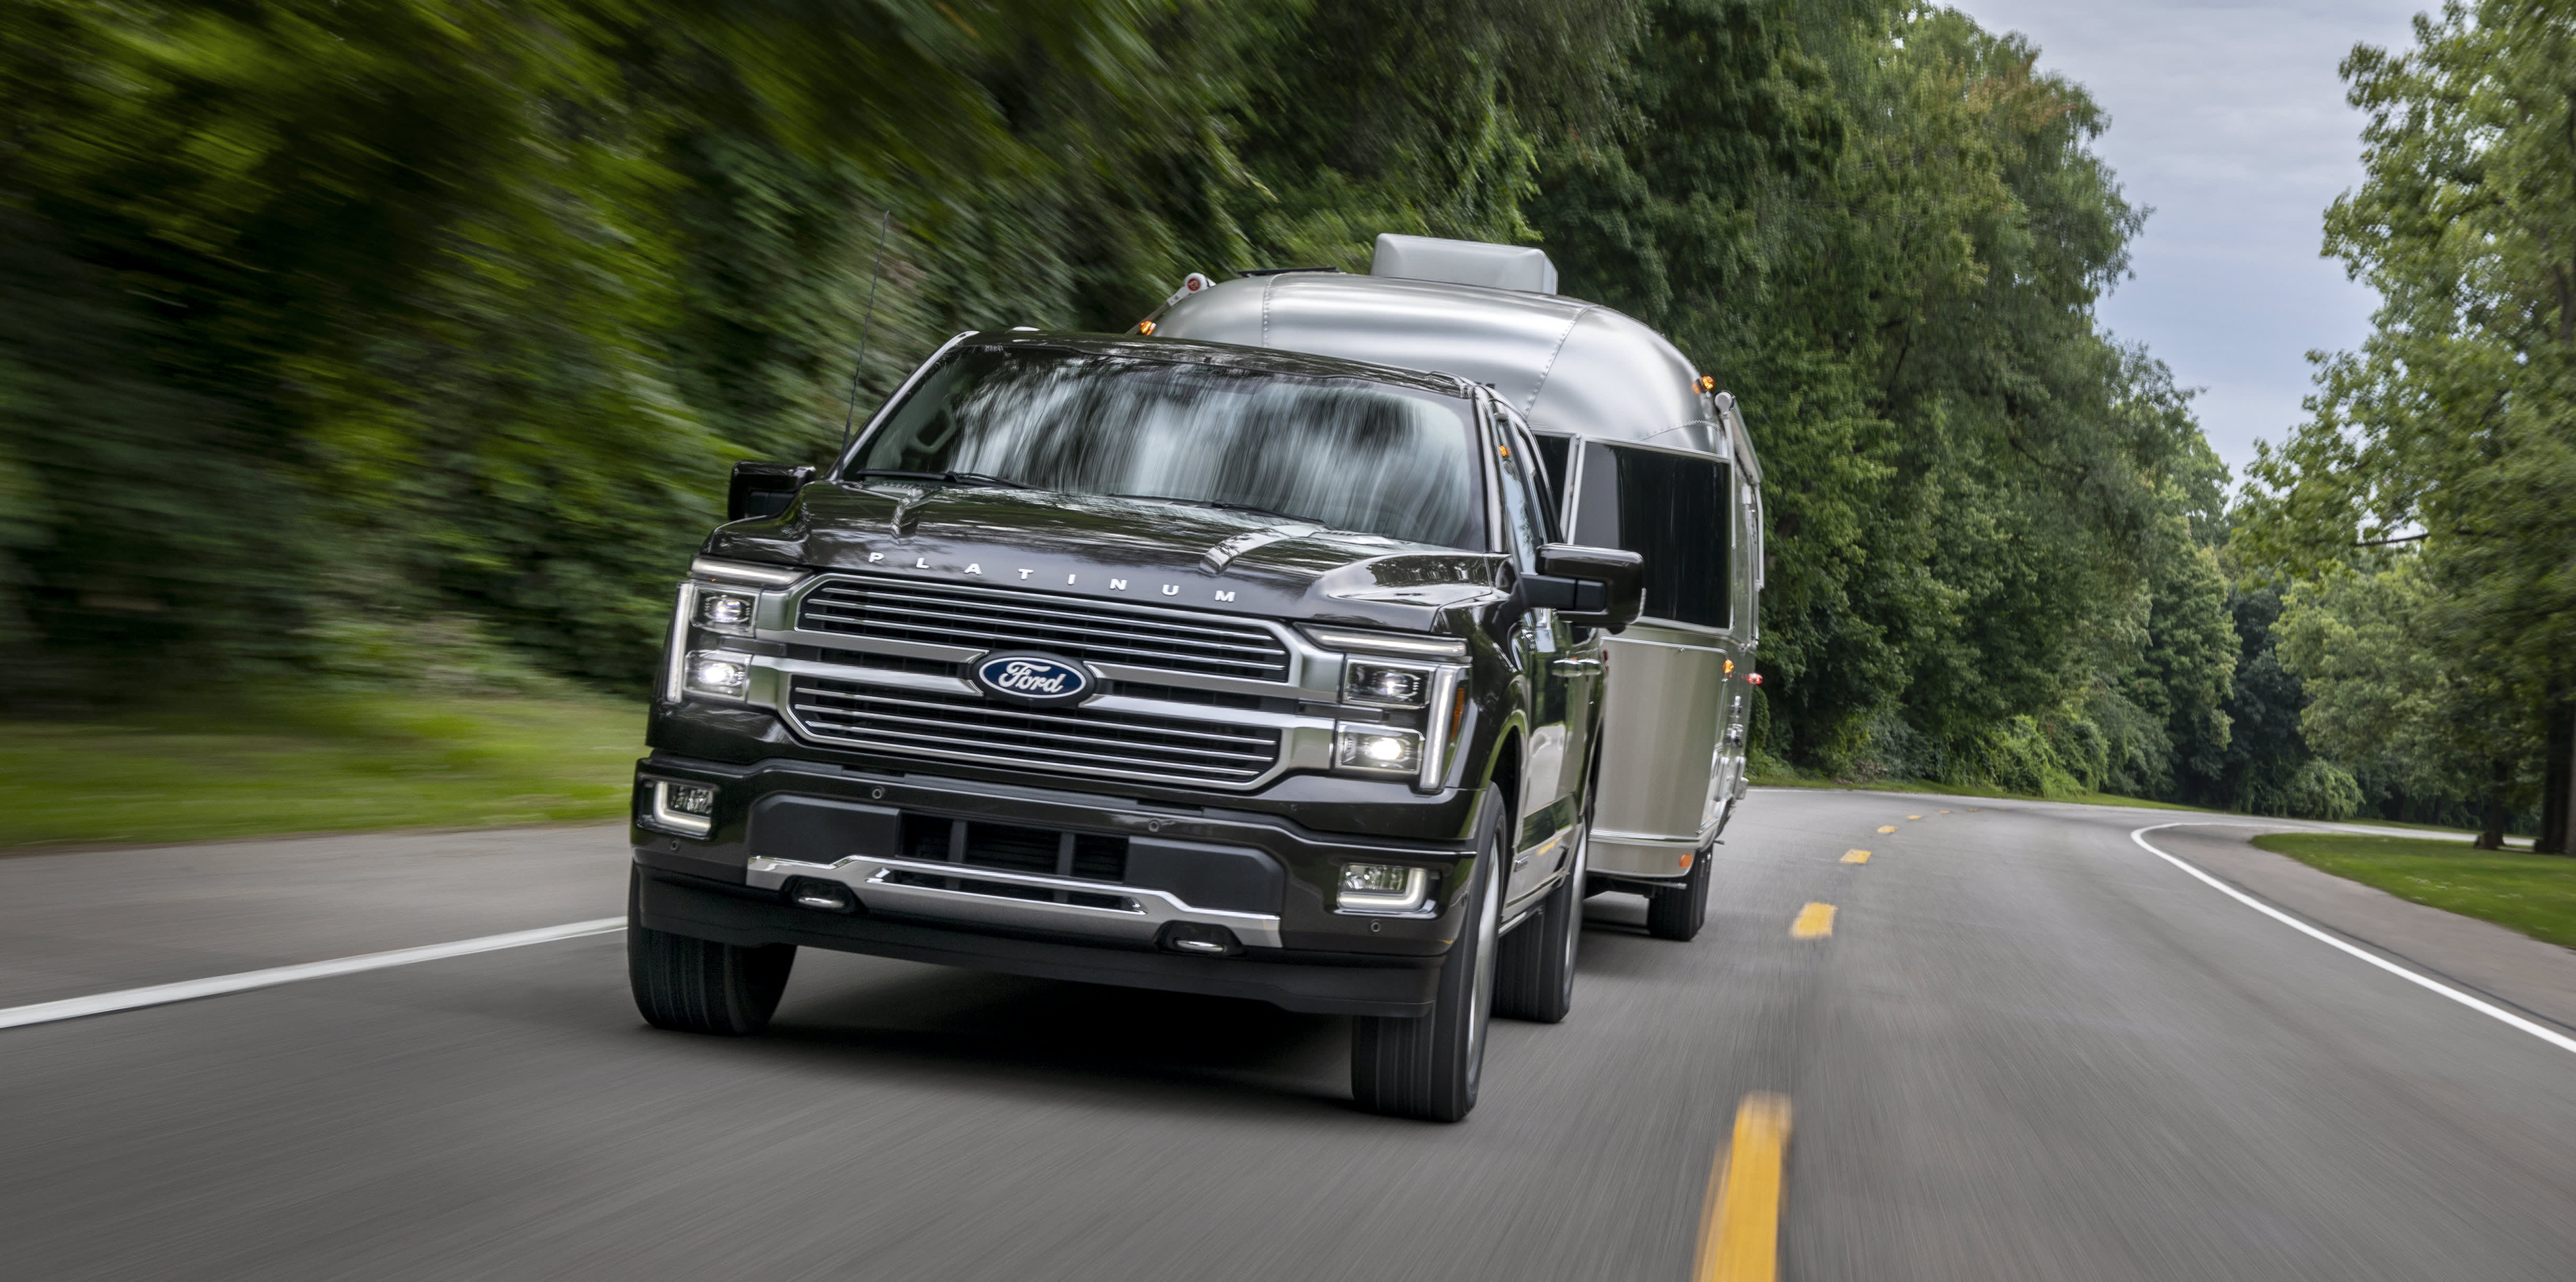 Ford doubles production of the F-150 hybrid pickup as electric vehicle sales growth slows